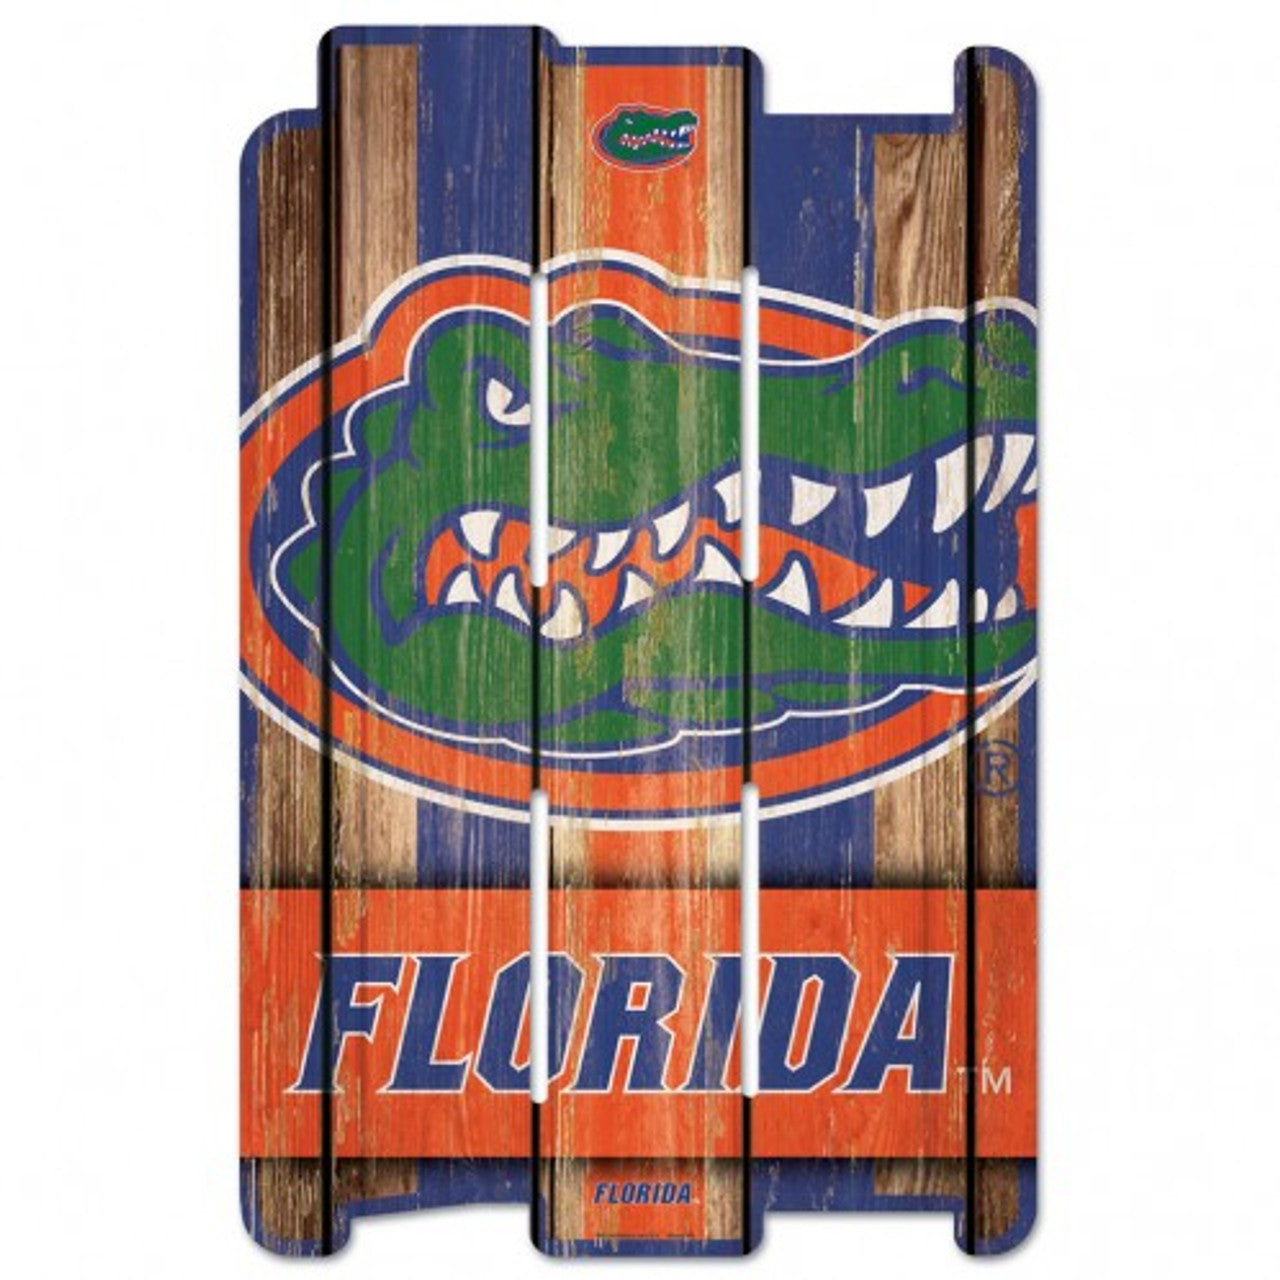 Florida Gators 11" x 17" Wood Fence Sign by Wincraft